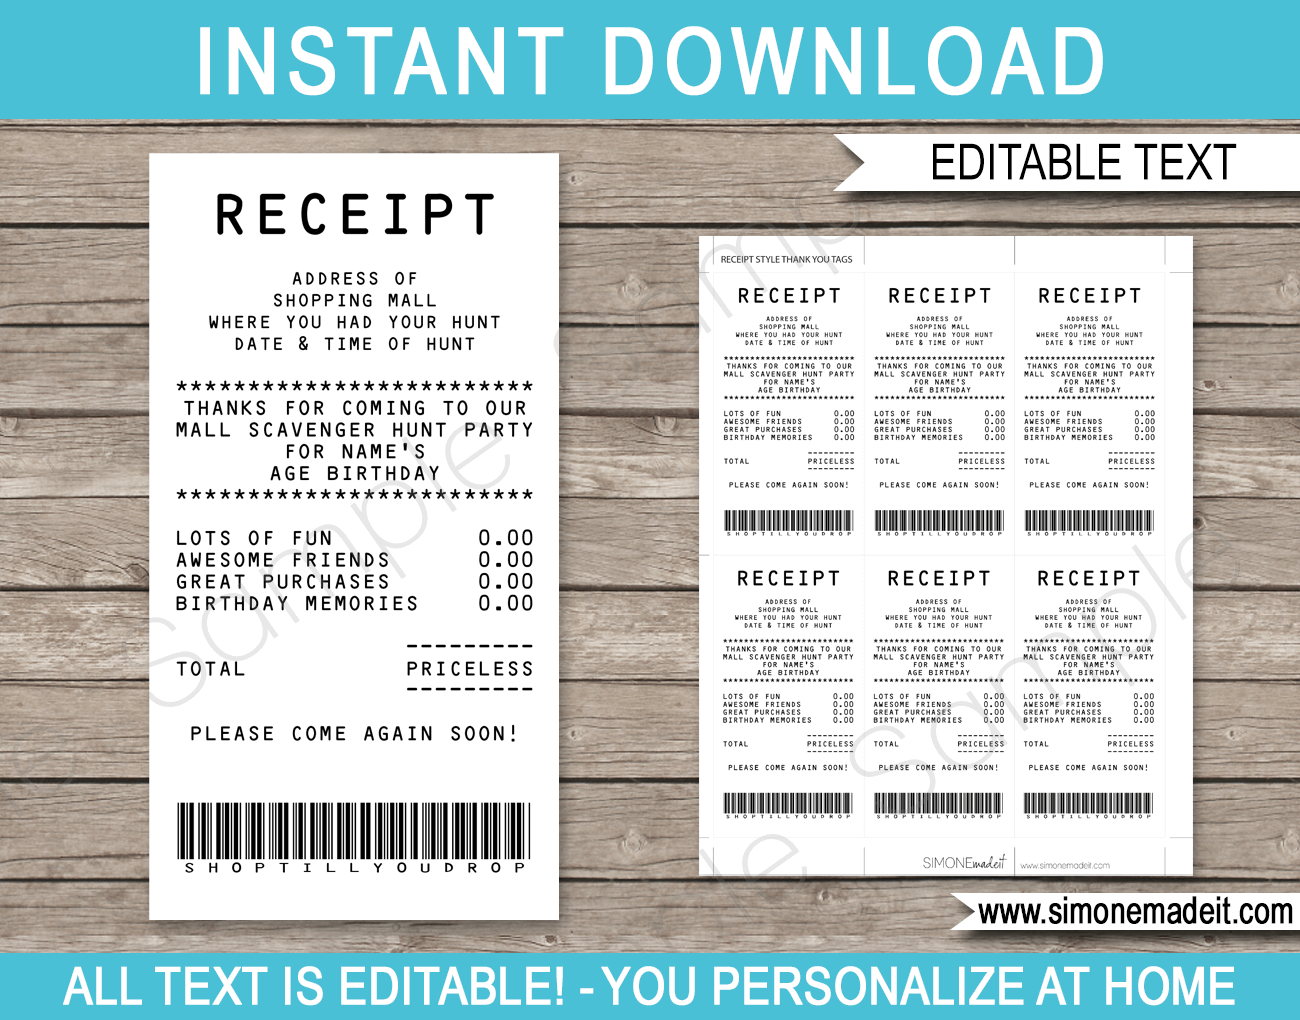 Mall Scavenger Hunt Party Receipt Favor Tags | Thank You Tags | Birthday Party | Editable DIY Template | $3.00 INSTANT DOWNLOAD via SIMONEmadeit.com